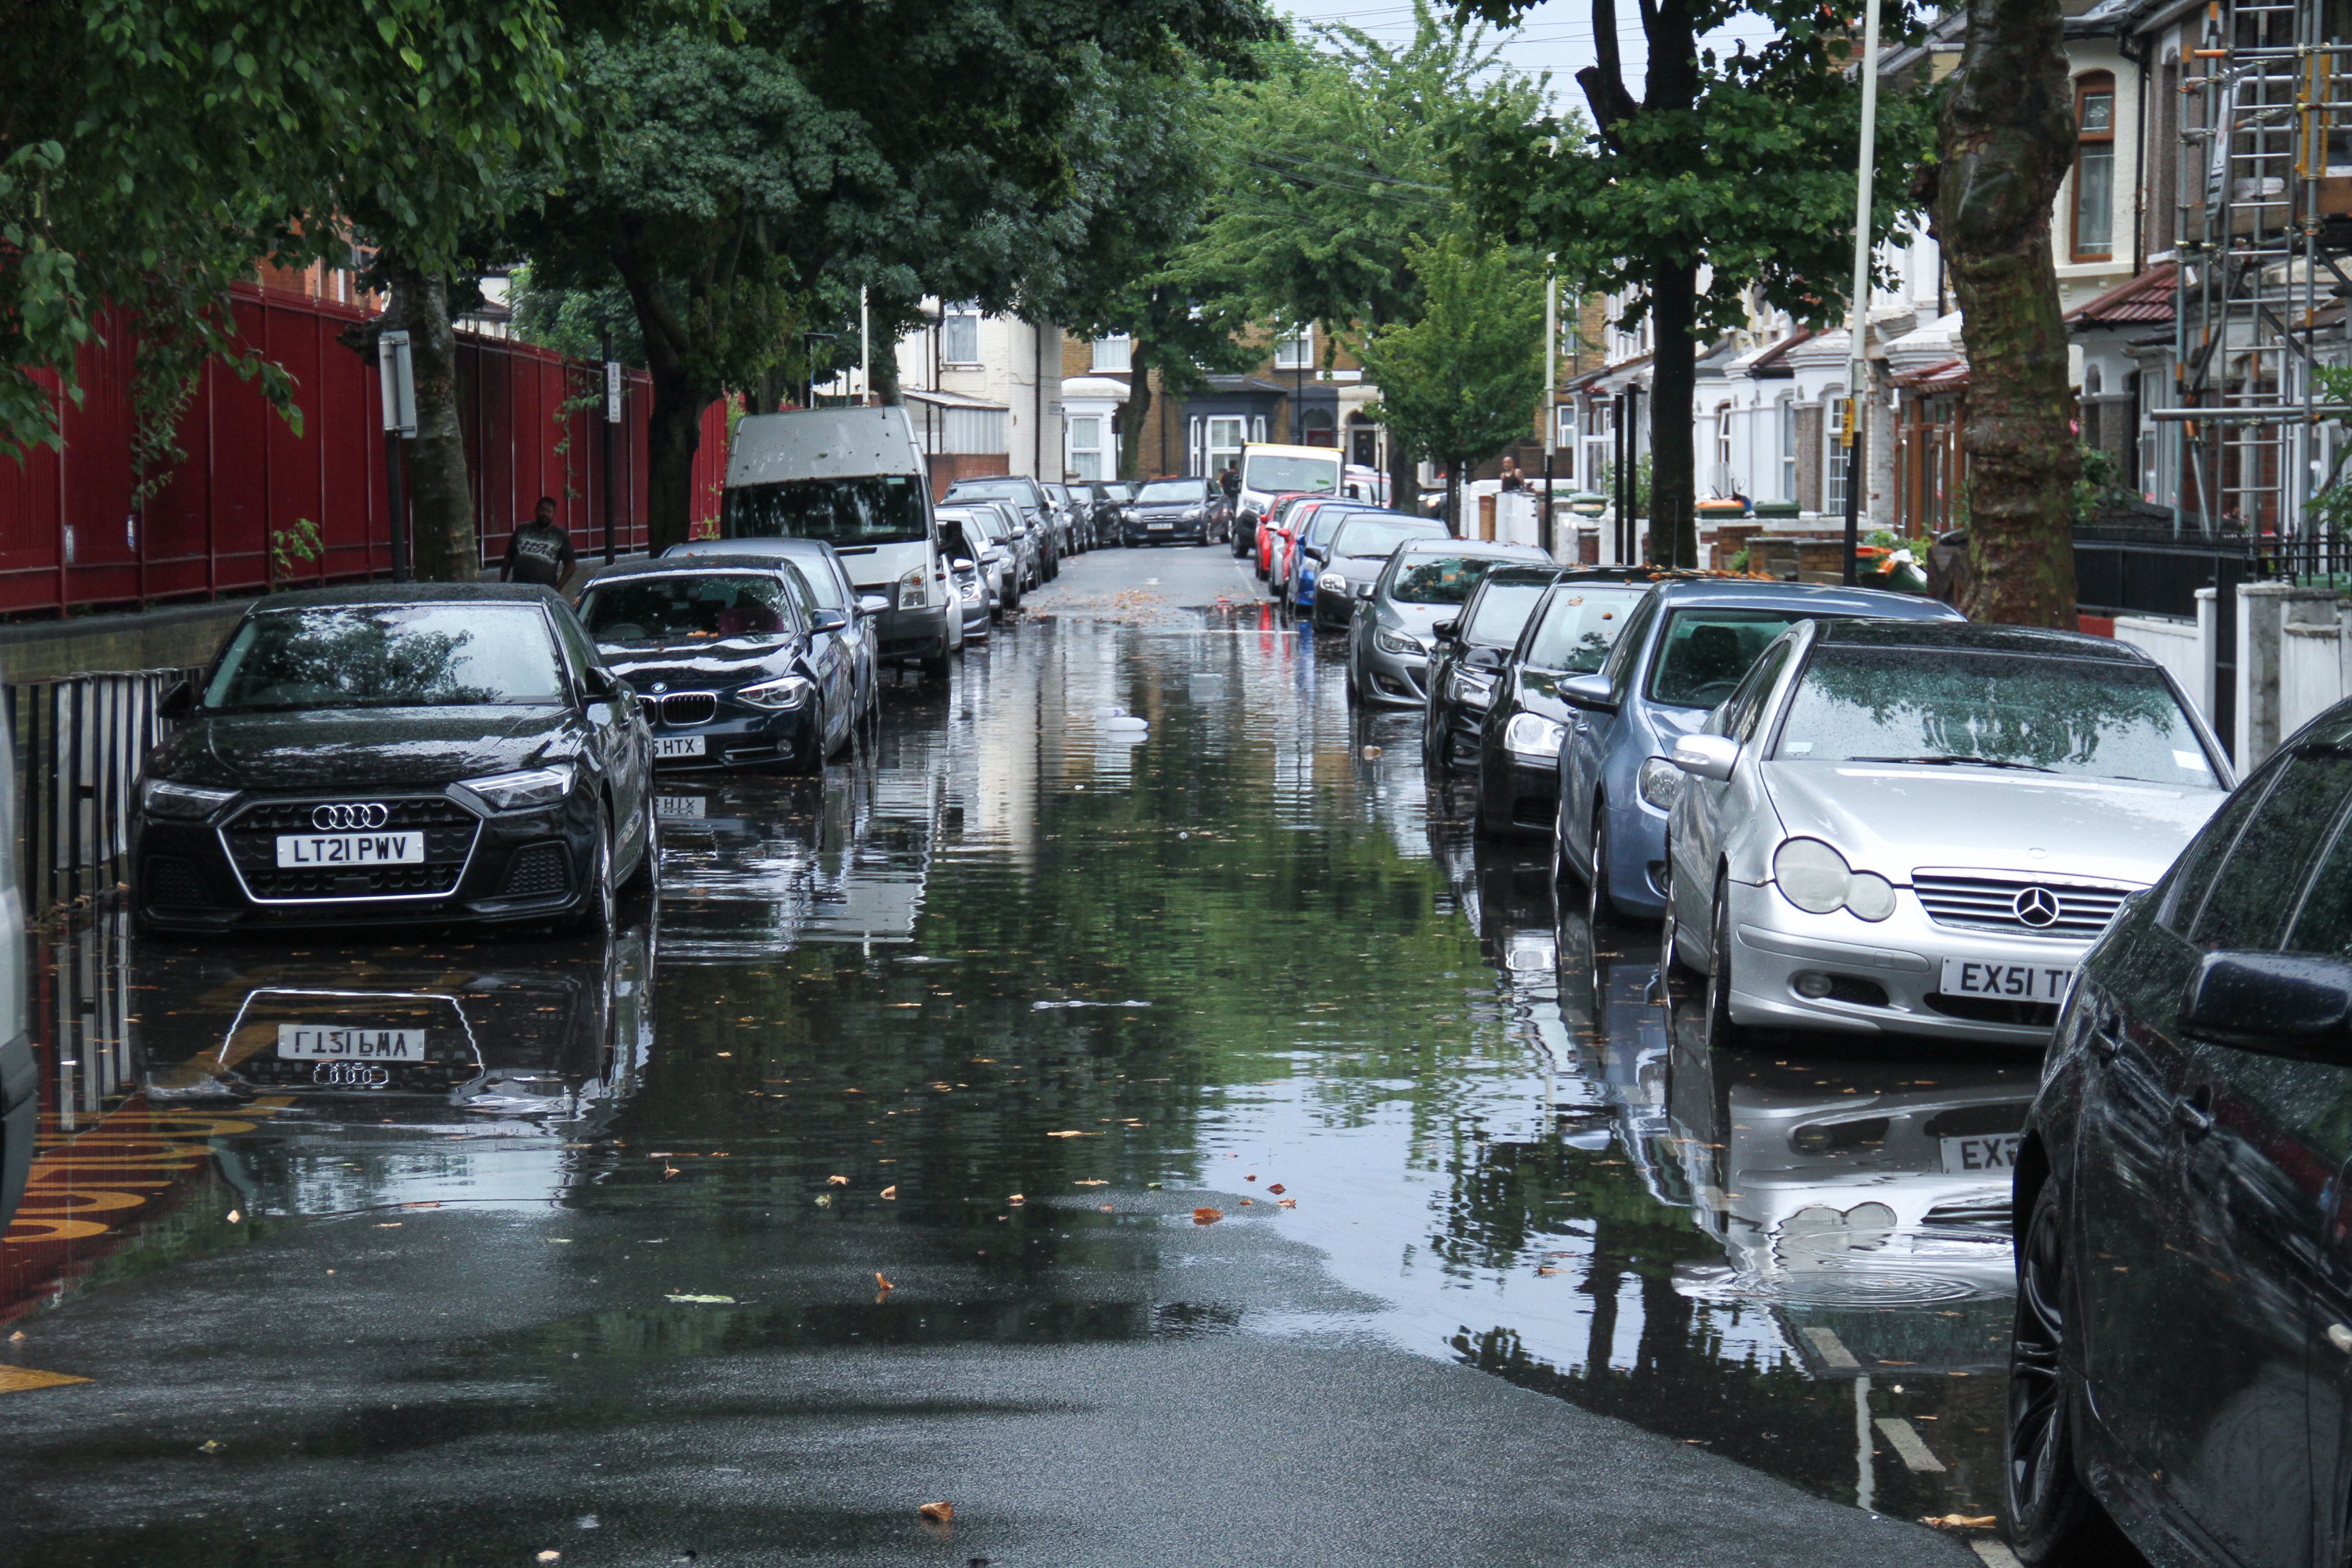 Vehicles seen parked on a flooded street in a suburb in East